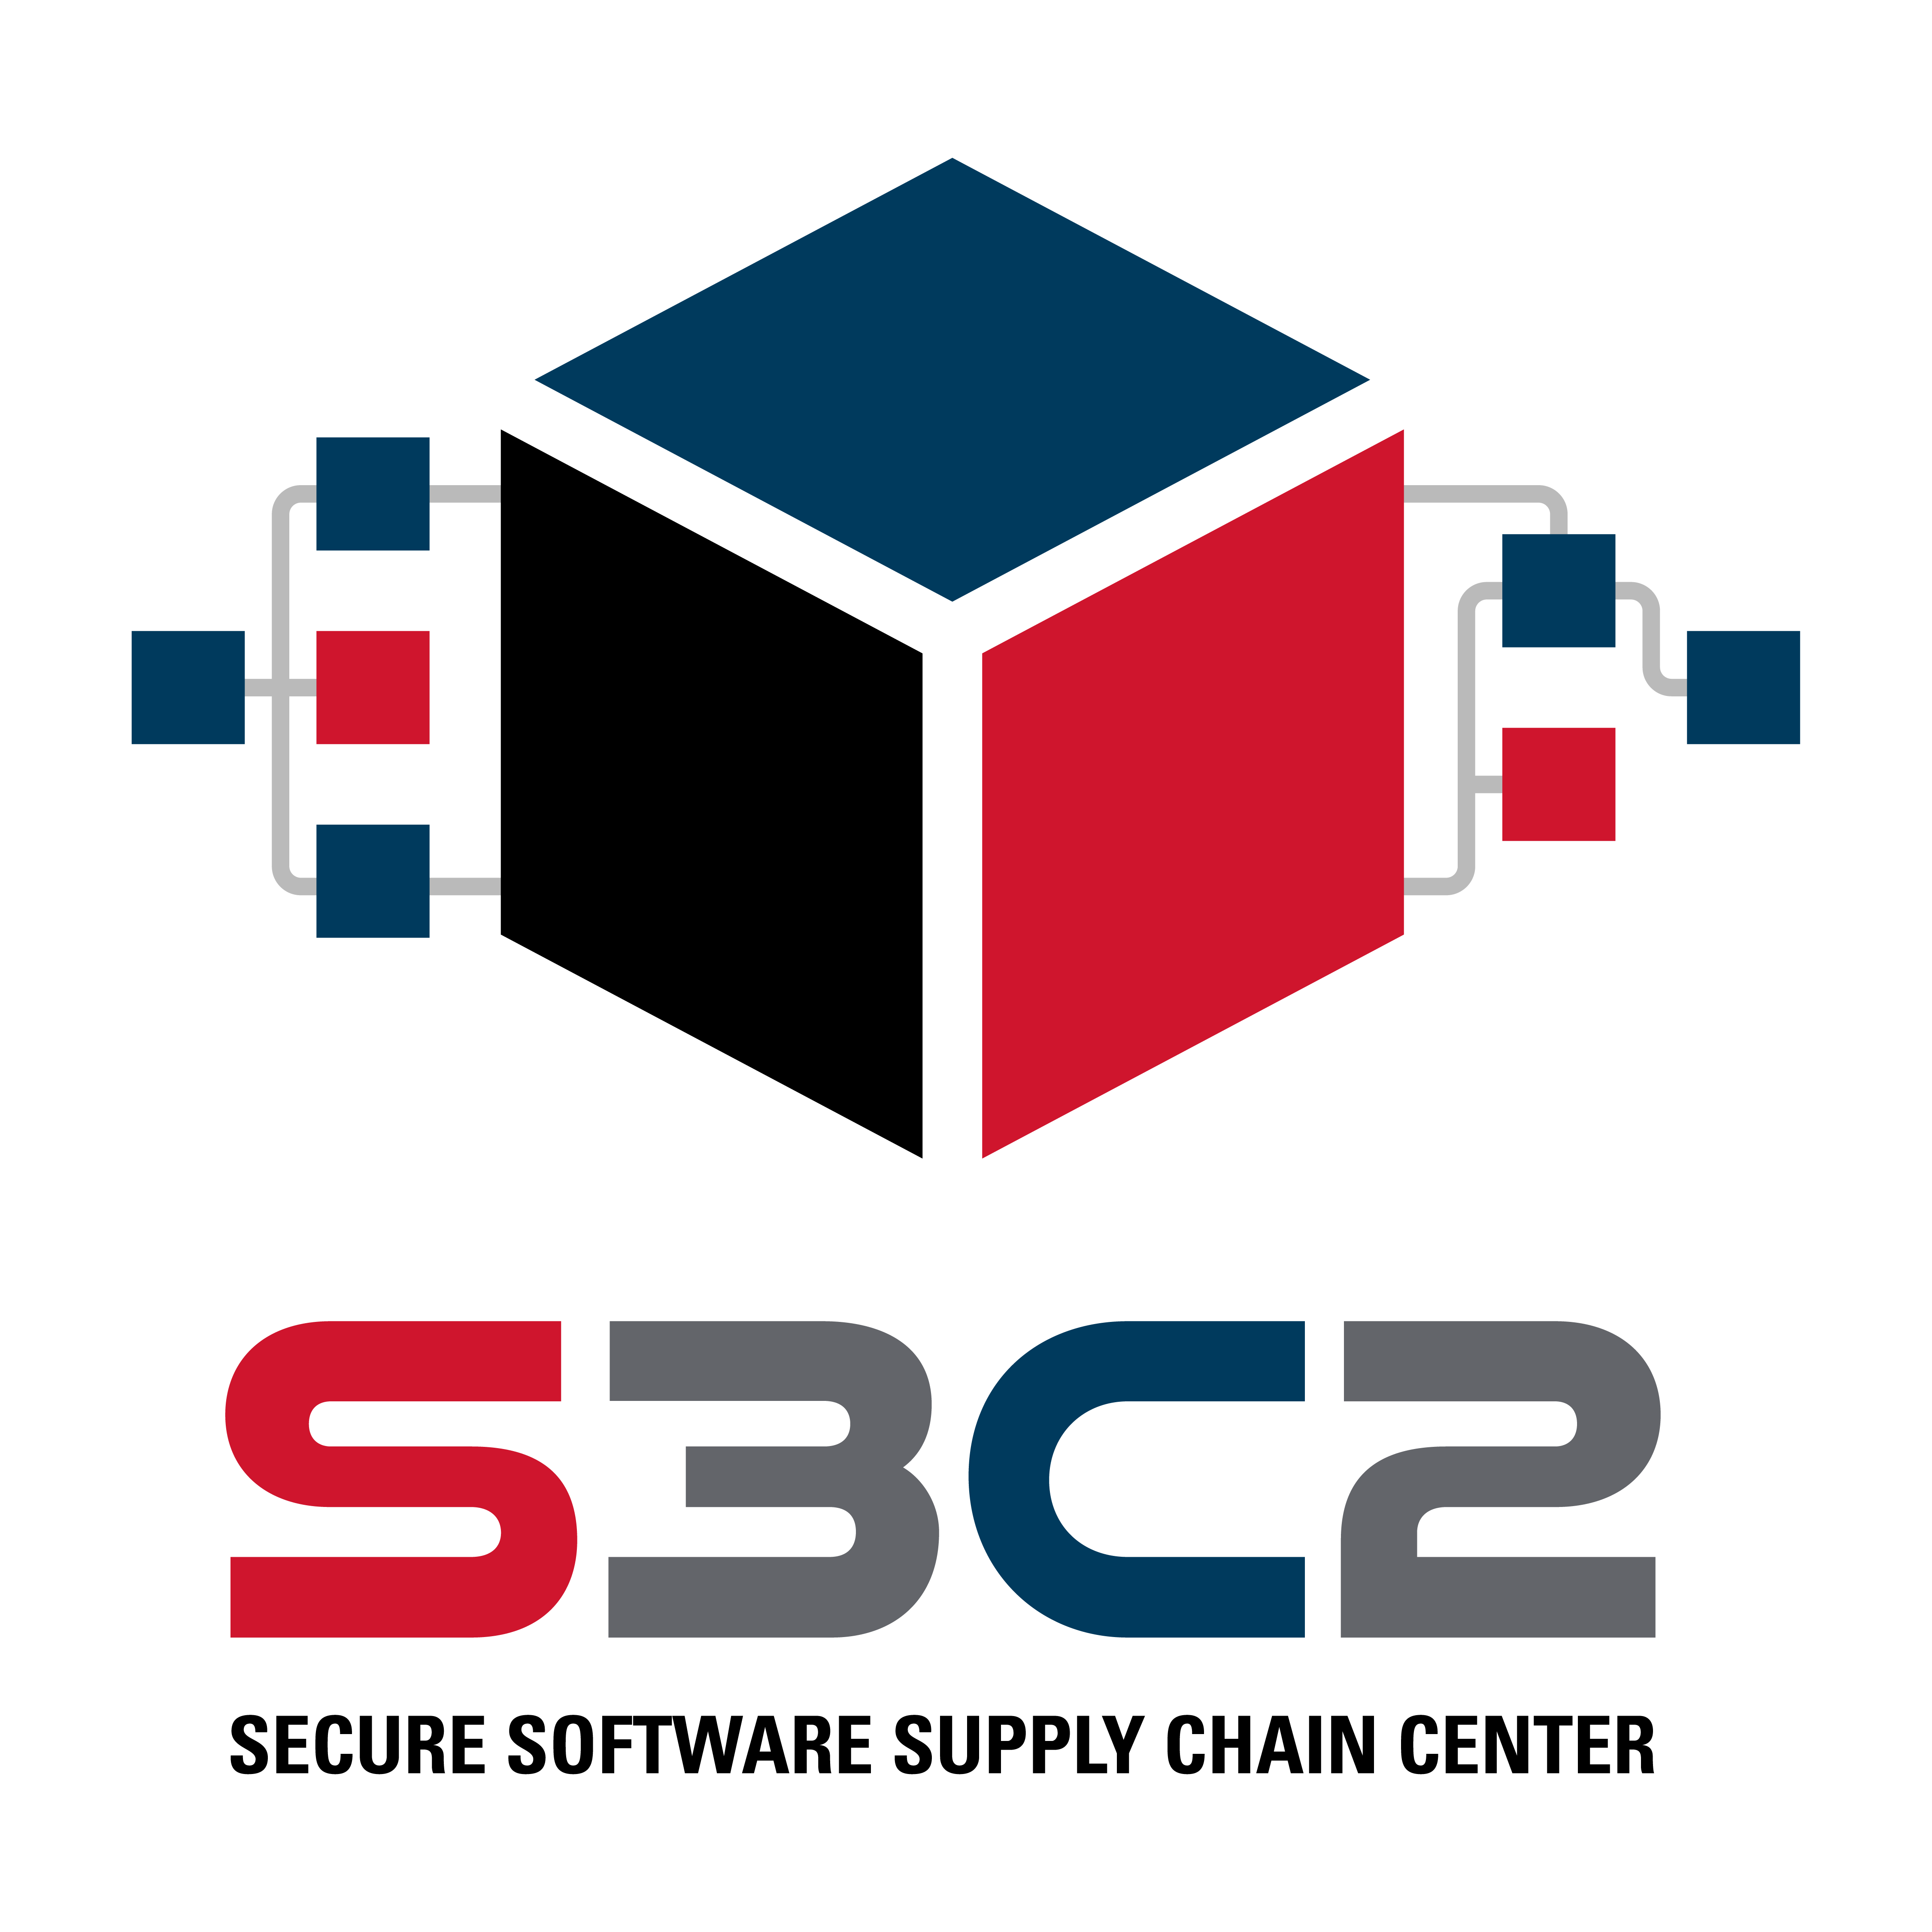 Secure Software Supply Chain Center (S3C2)